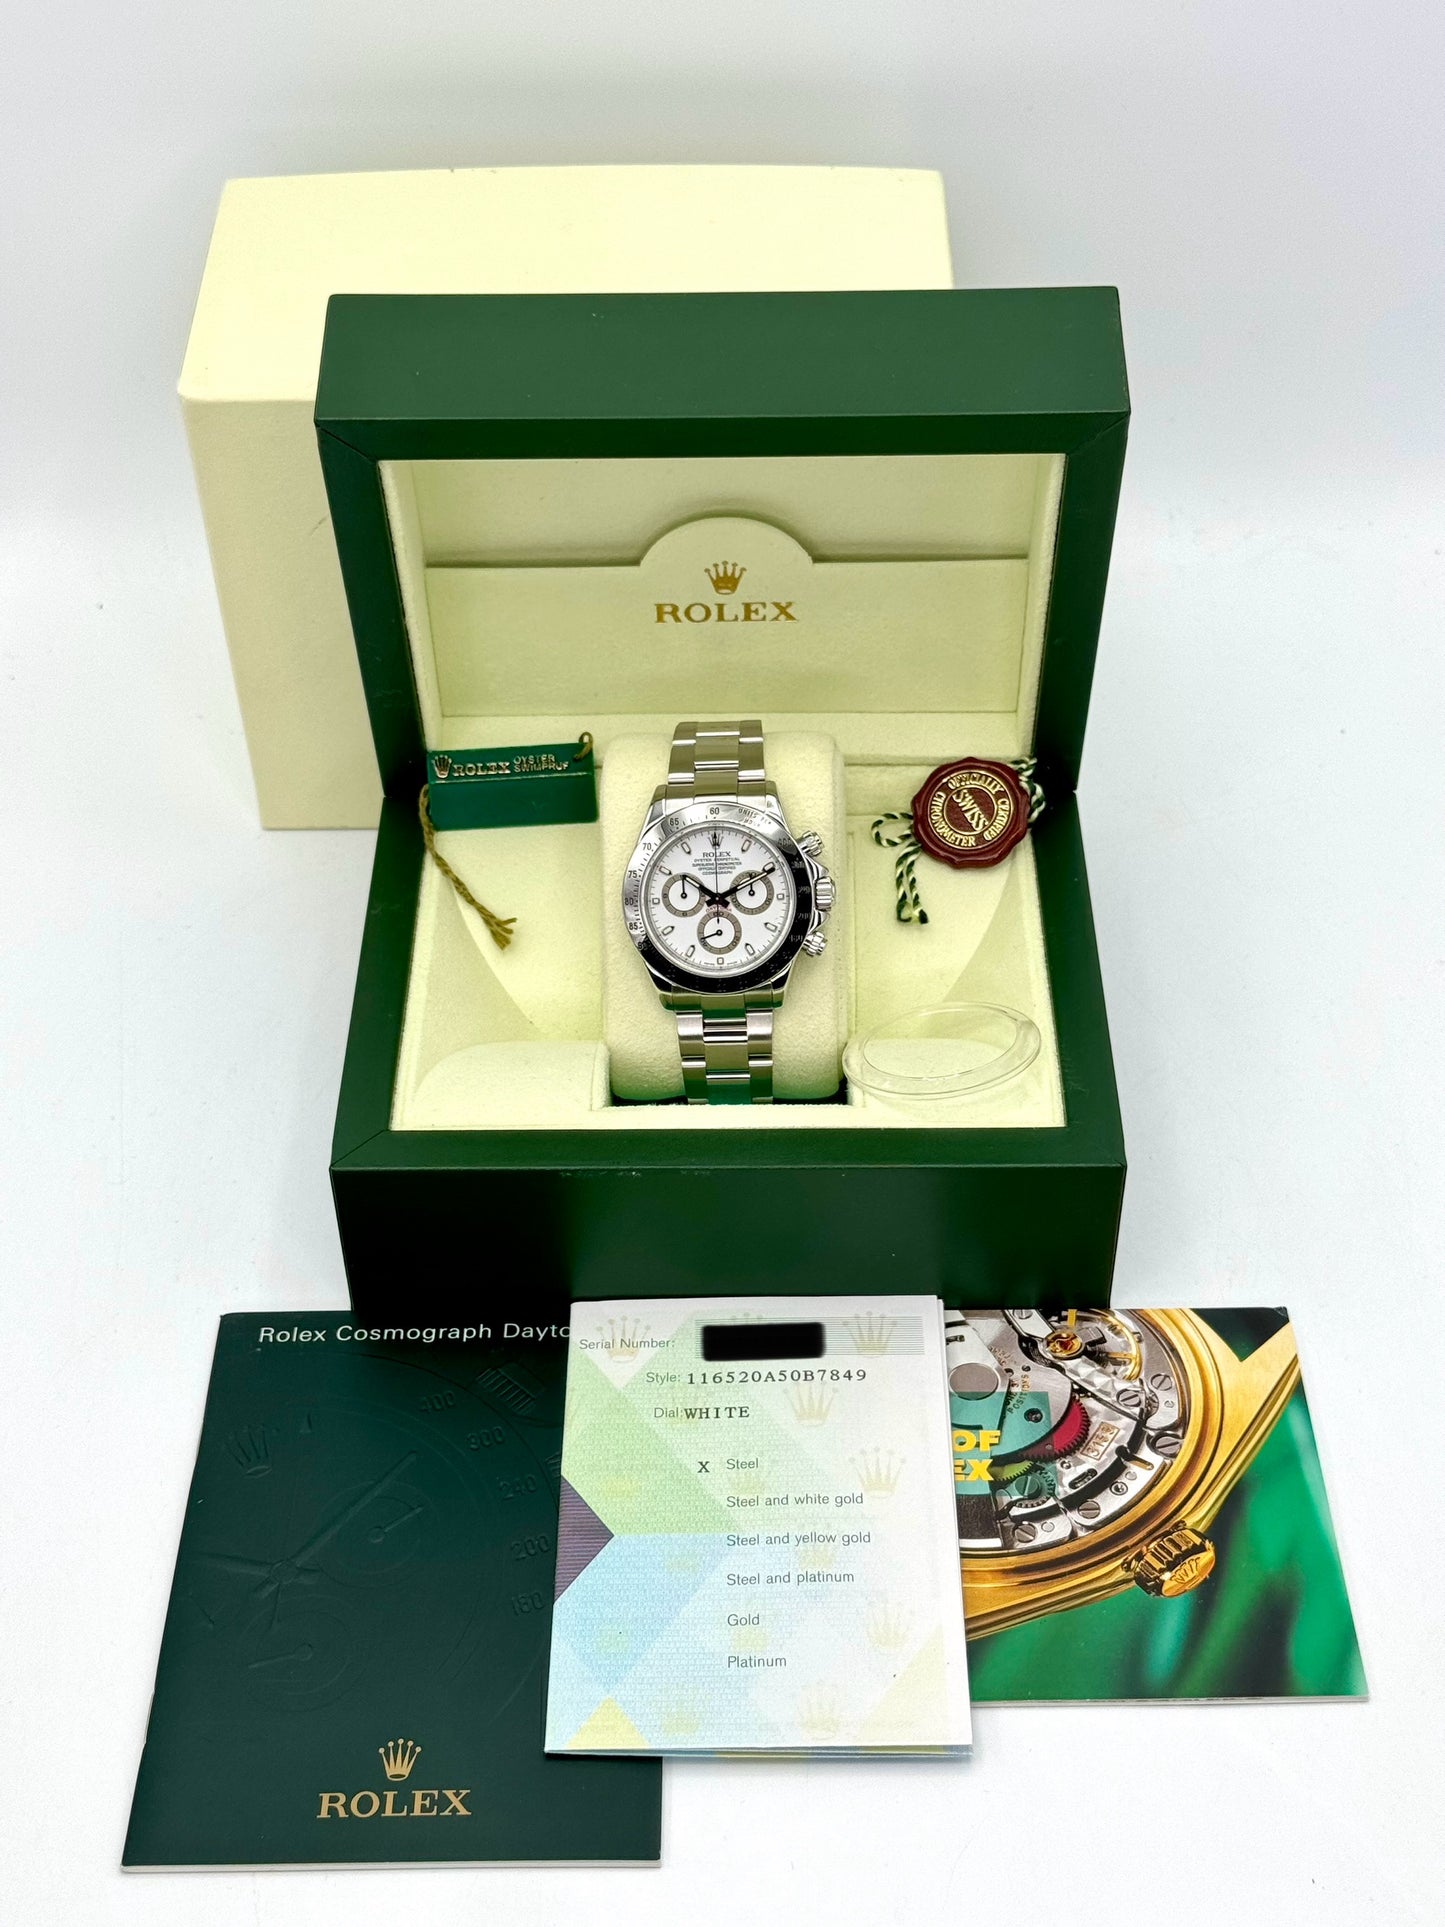 2005 Rolex Daytona 40mm 116520 Stainless Steel White Dial - MyWatchLLC